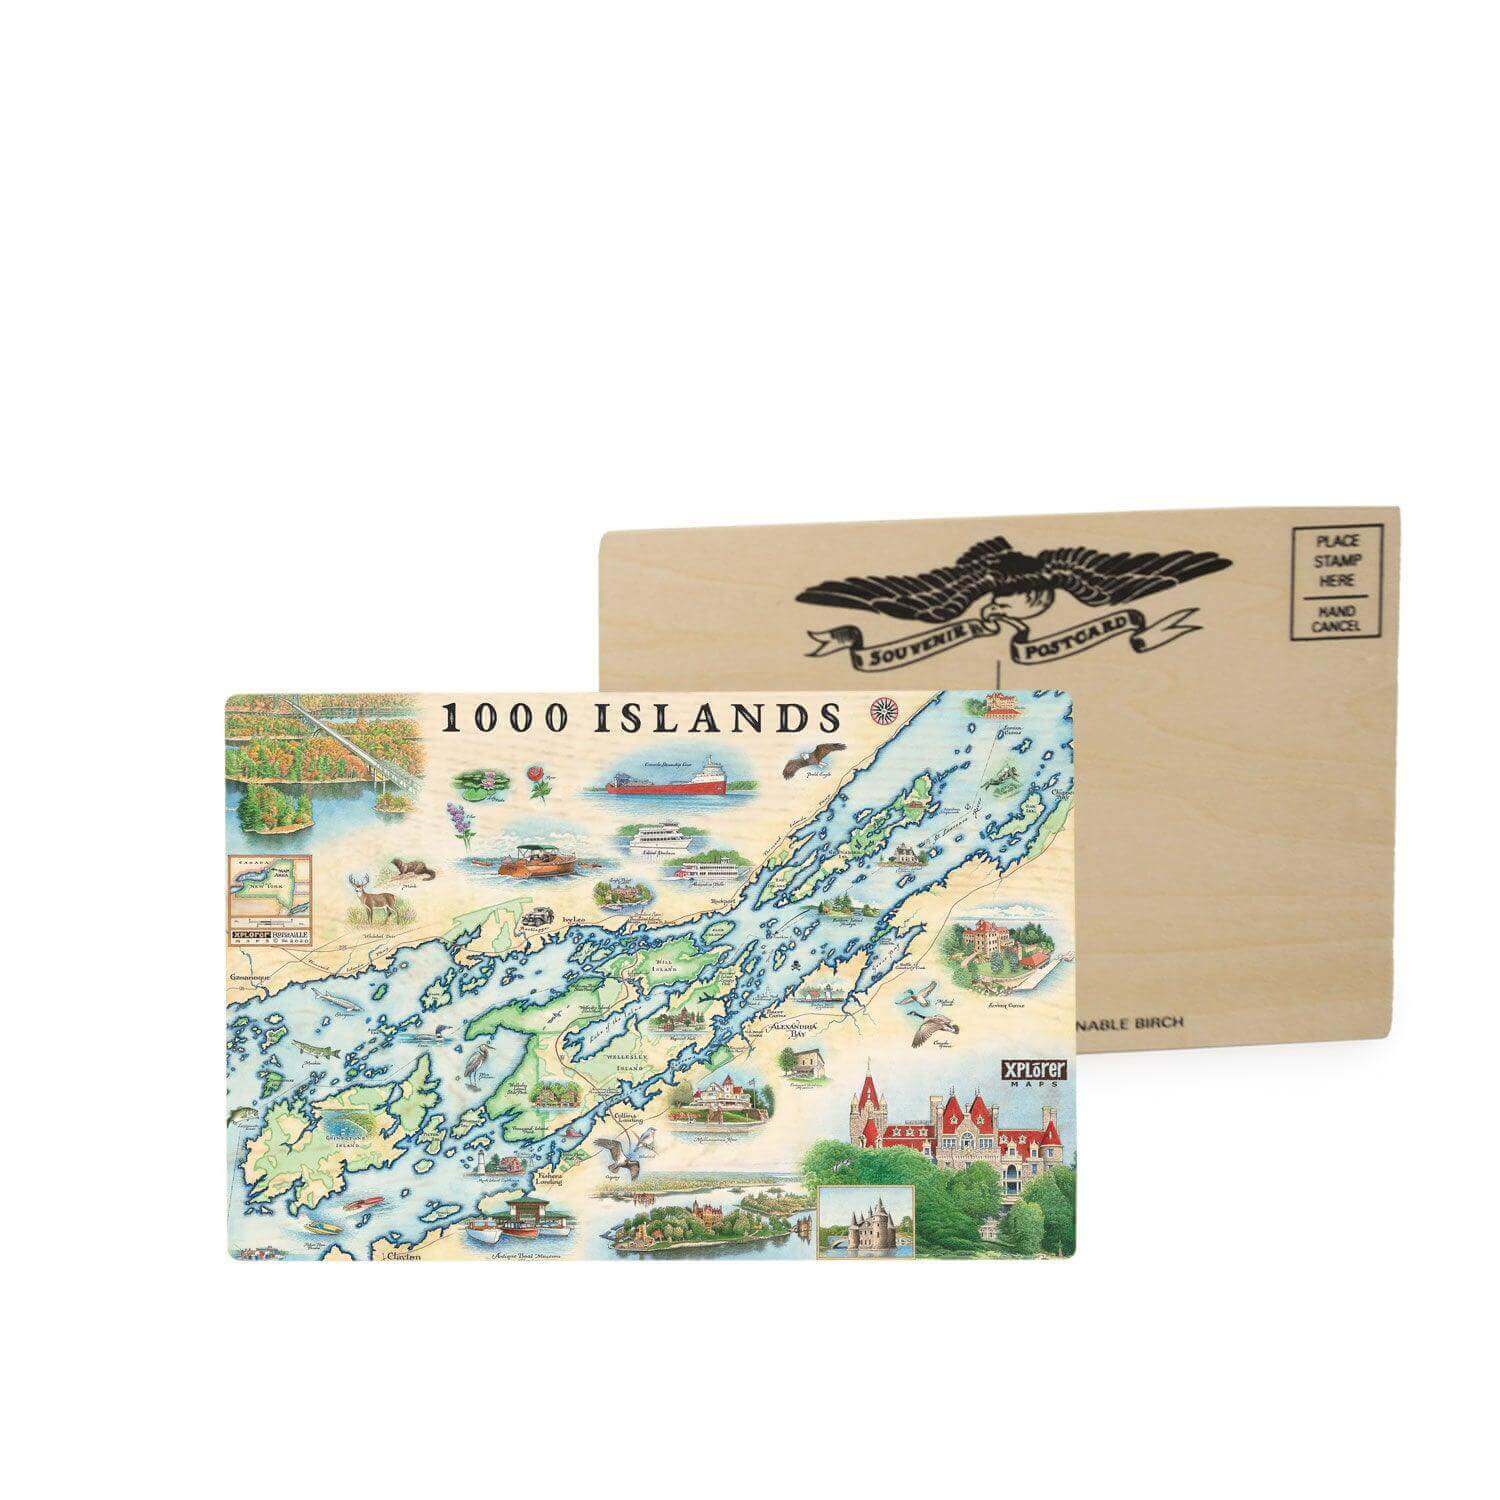 1000 Islands Map Mailable Wood Postcards measure 6 1/4